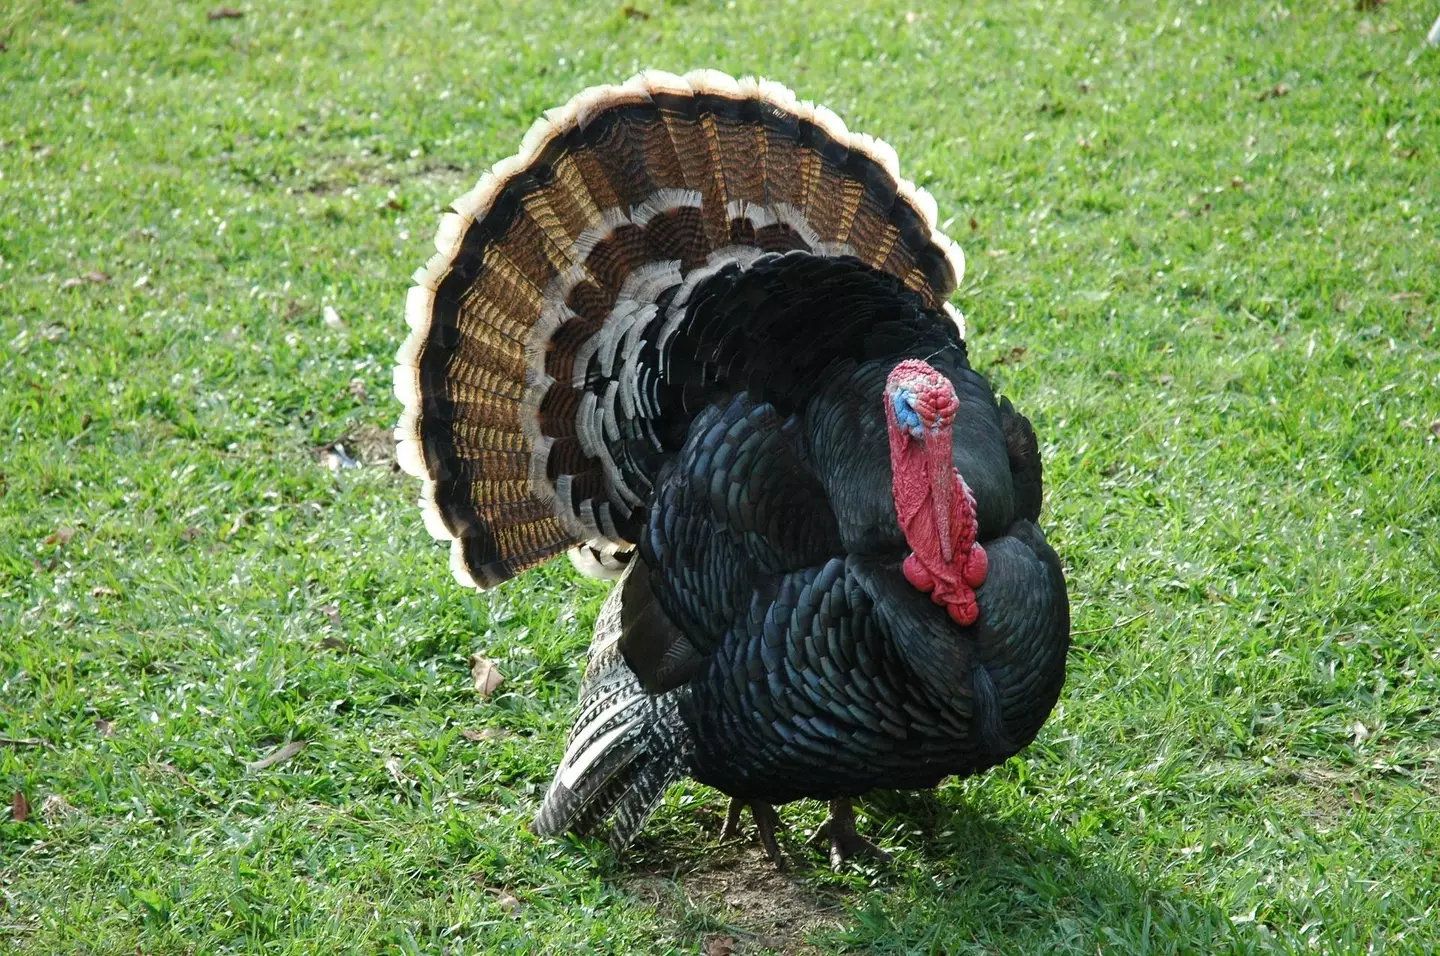 Turkey changed its name to disassociate from the bird.